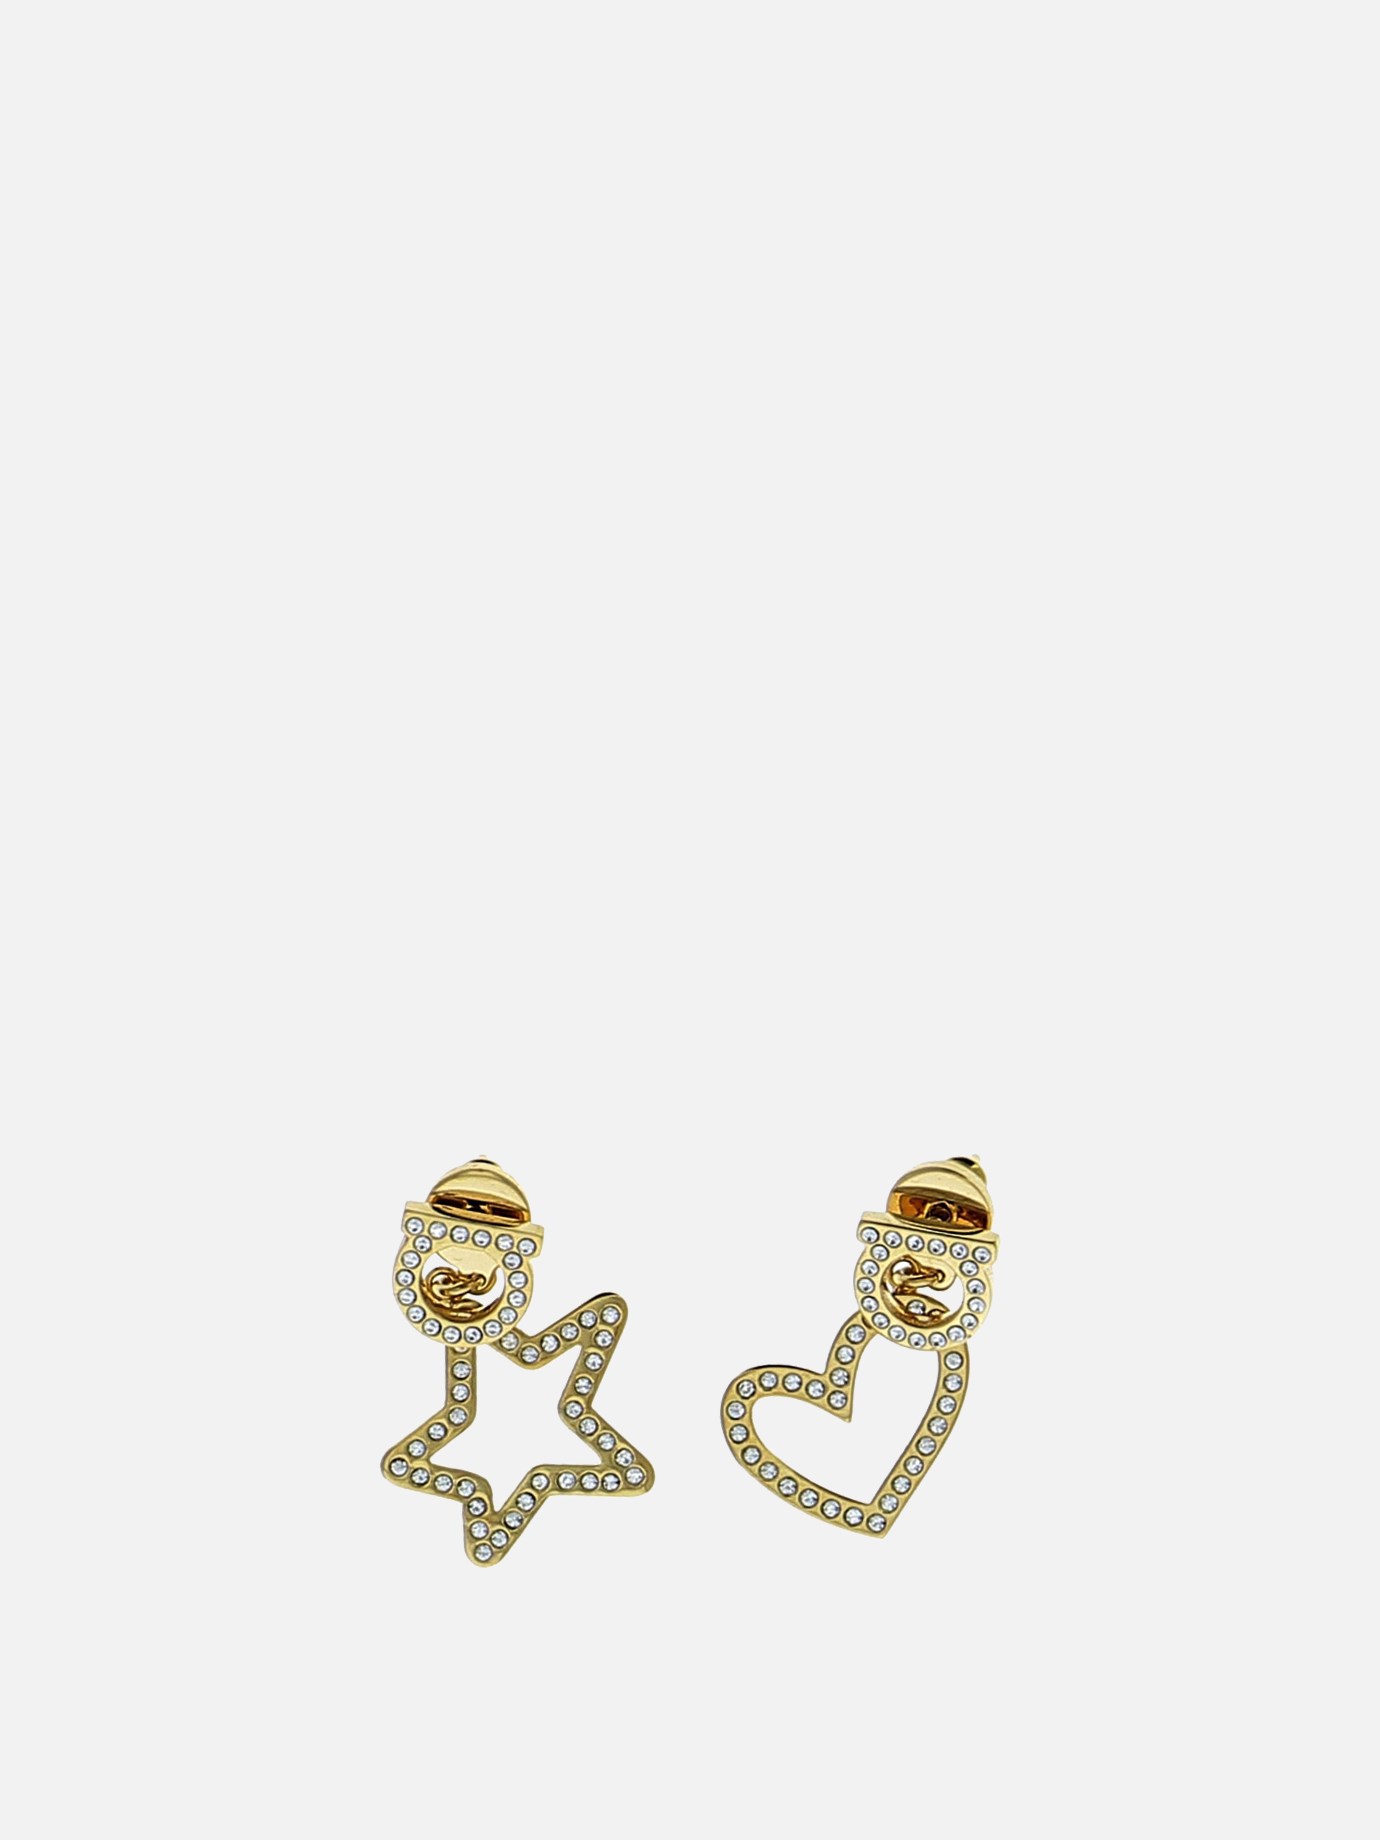 Earrings with crystalsby Salvatore Ferragamo - 3